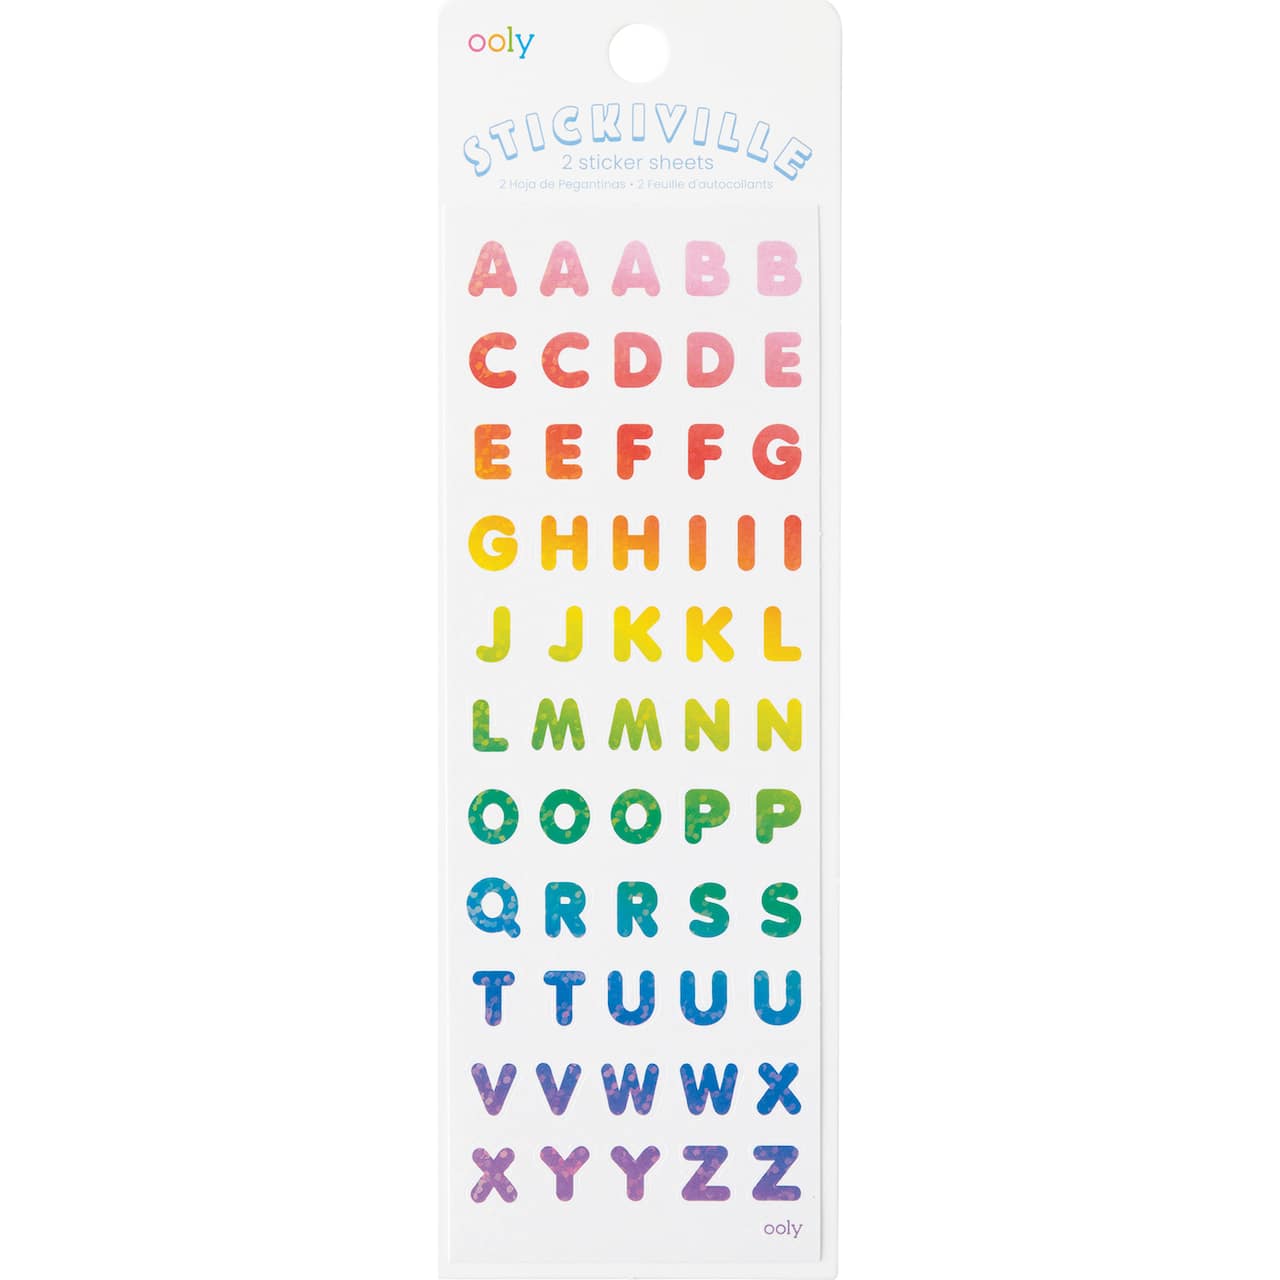 Ooly Stickiville Holographic Glitter Rainbow Letters Skinny Sticker Sheet, 2ct.